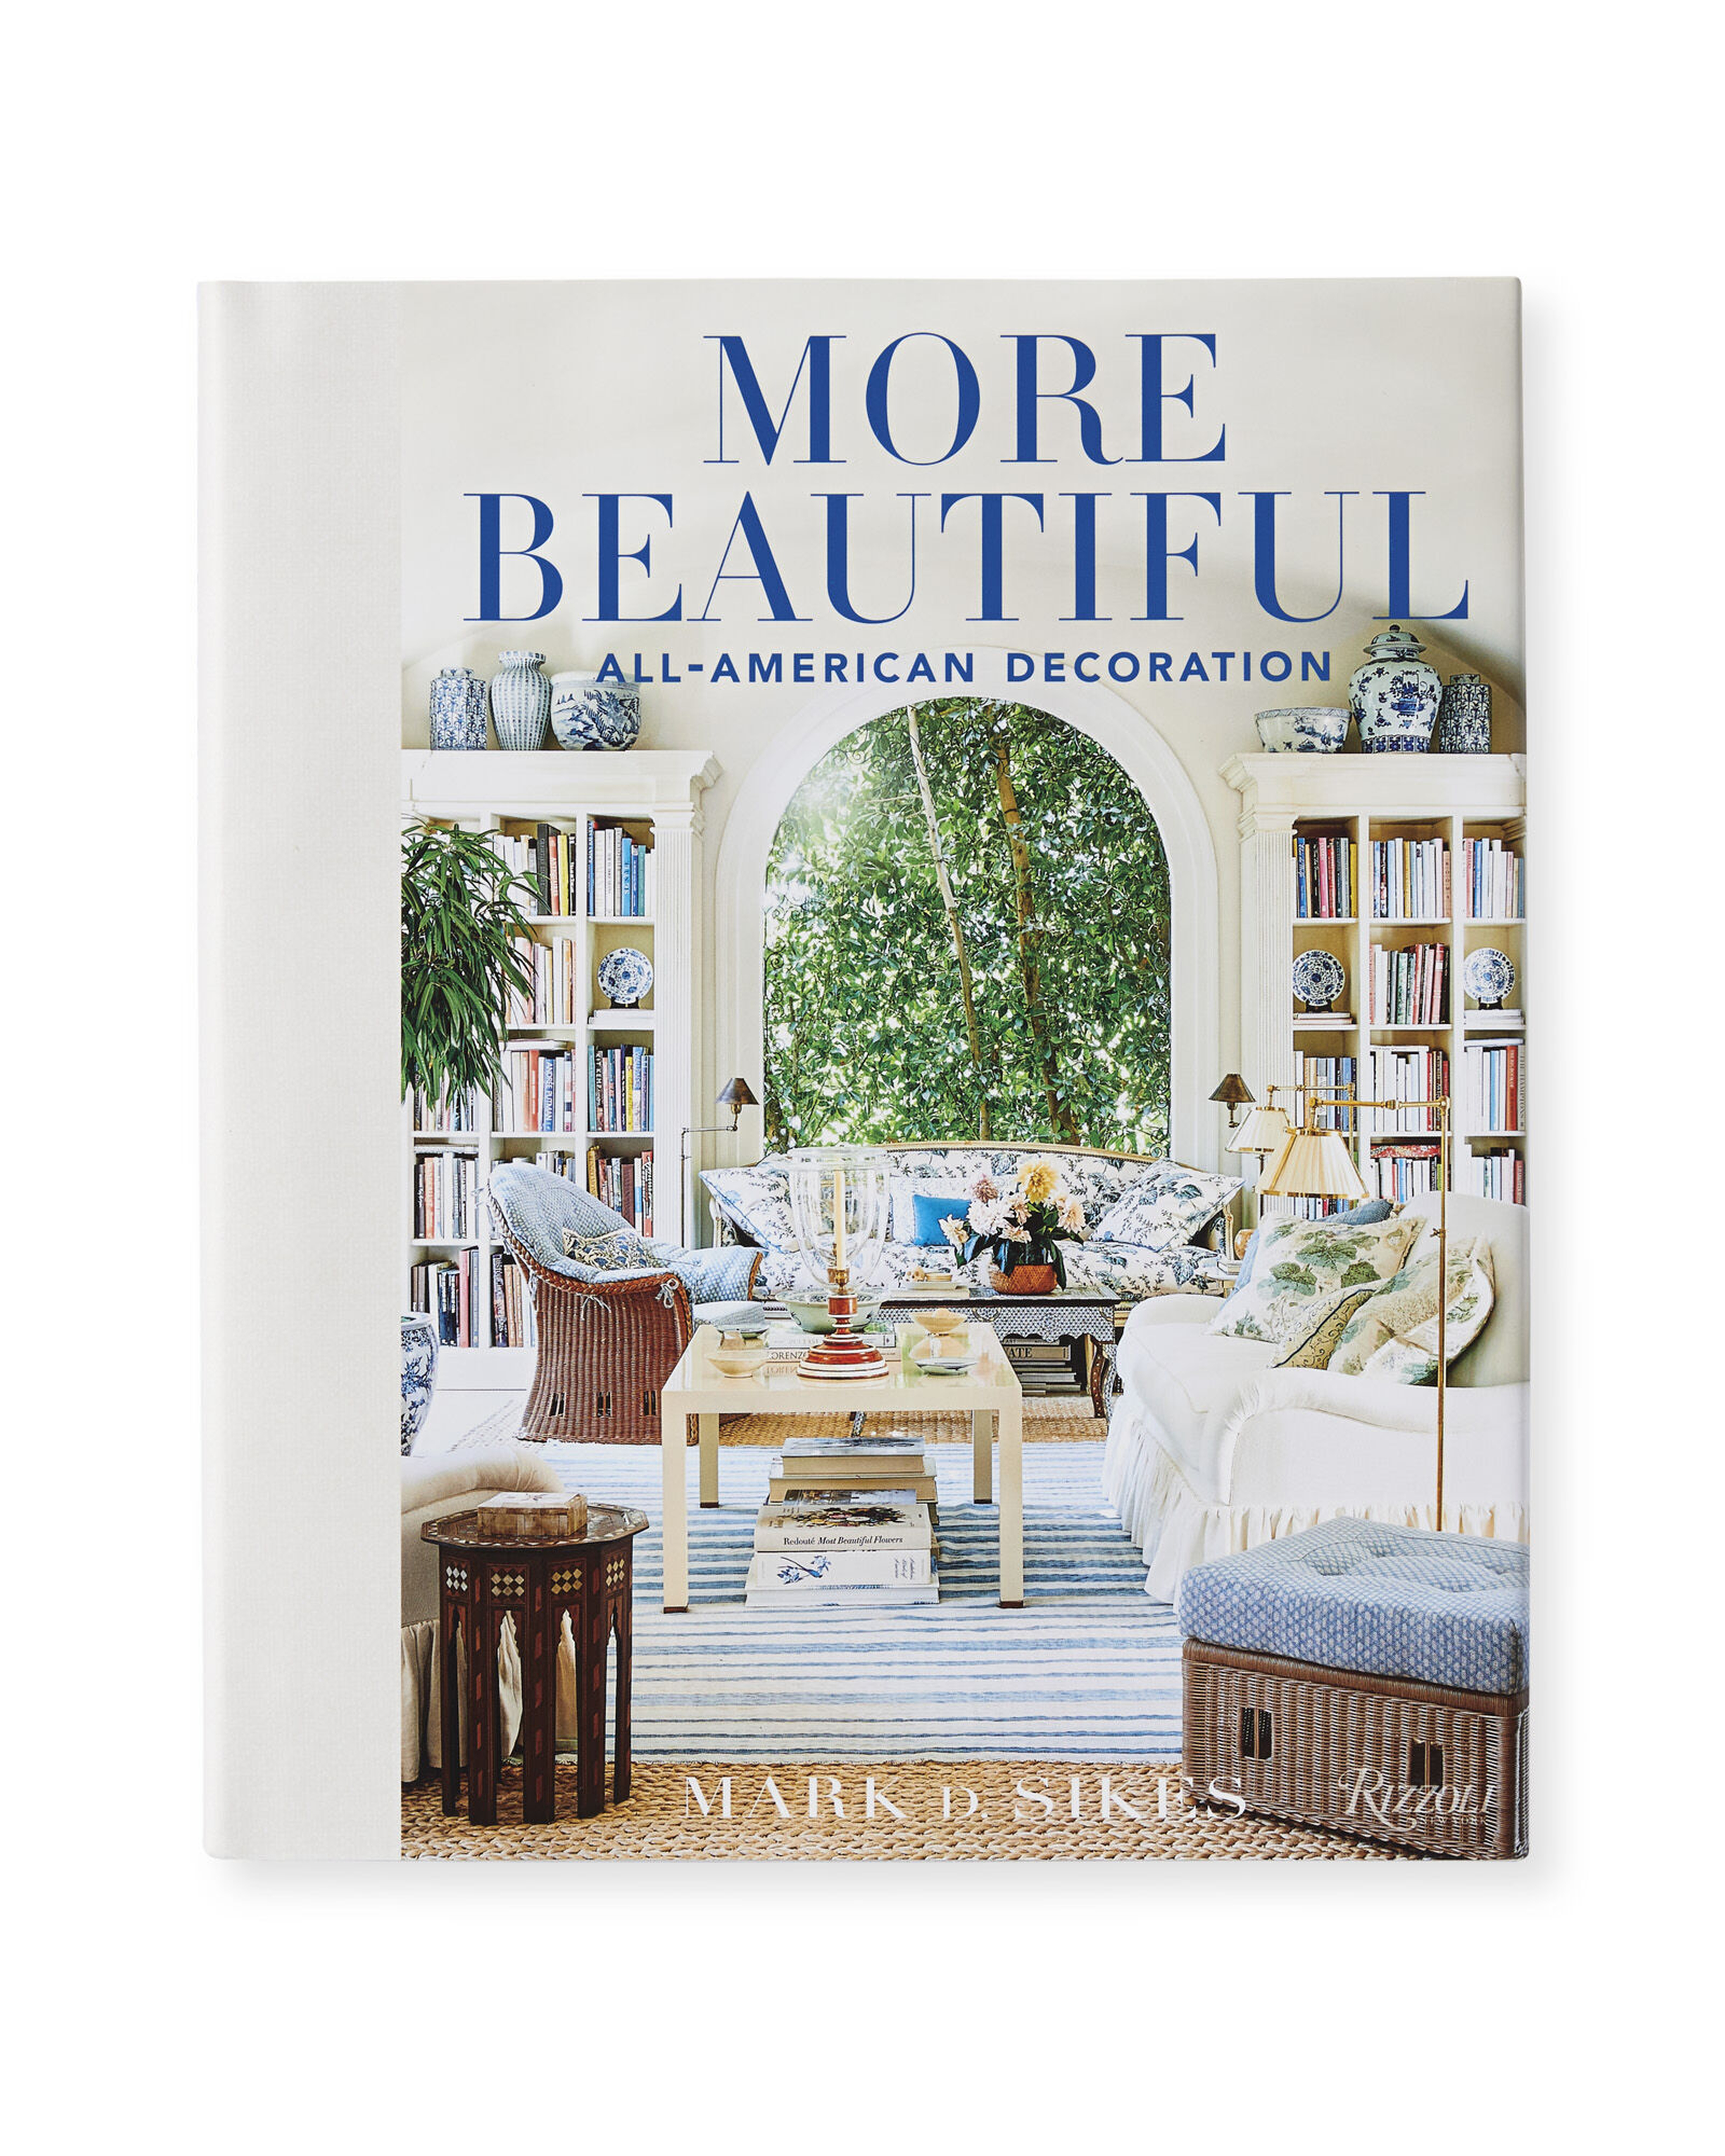 "More Beautiful" by Mark D. Sikes - Serena and Lily